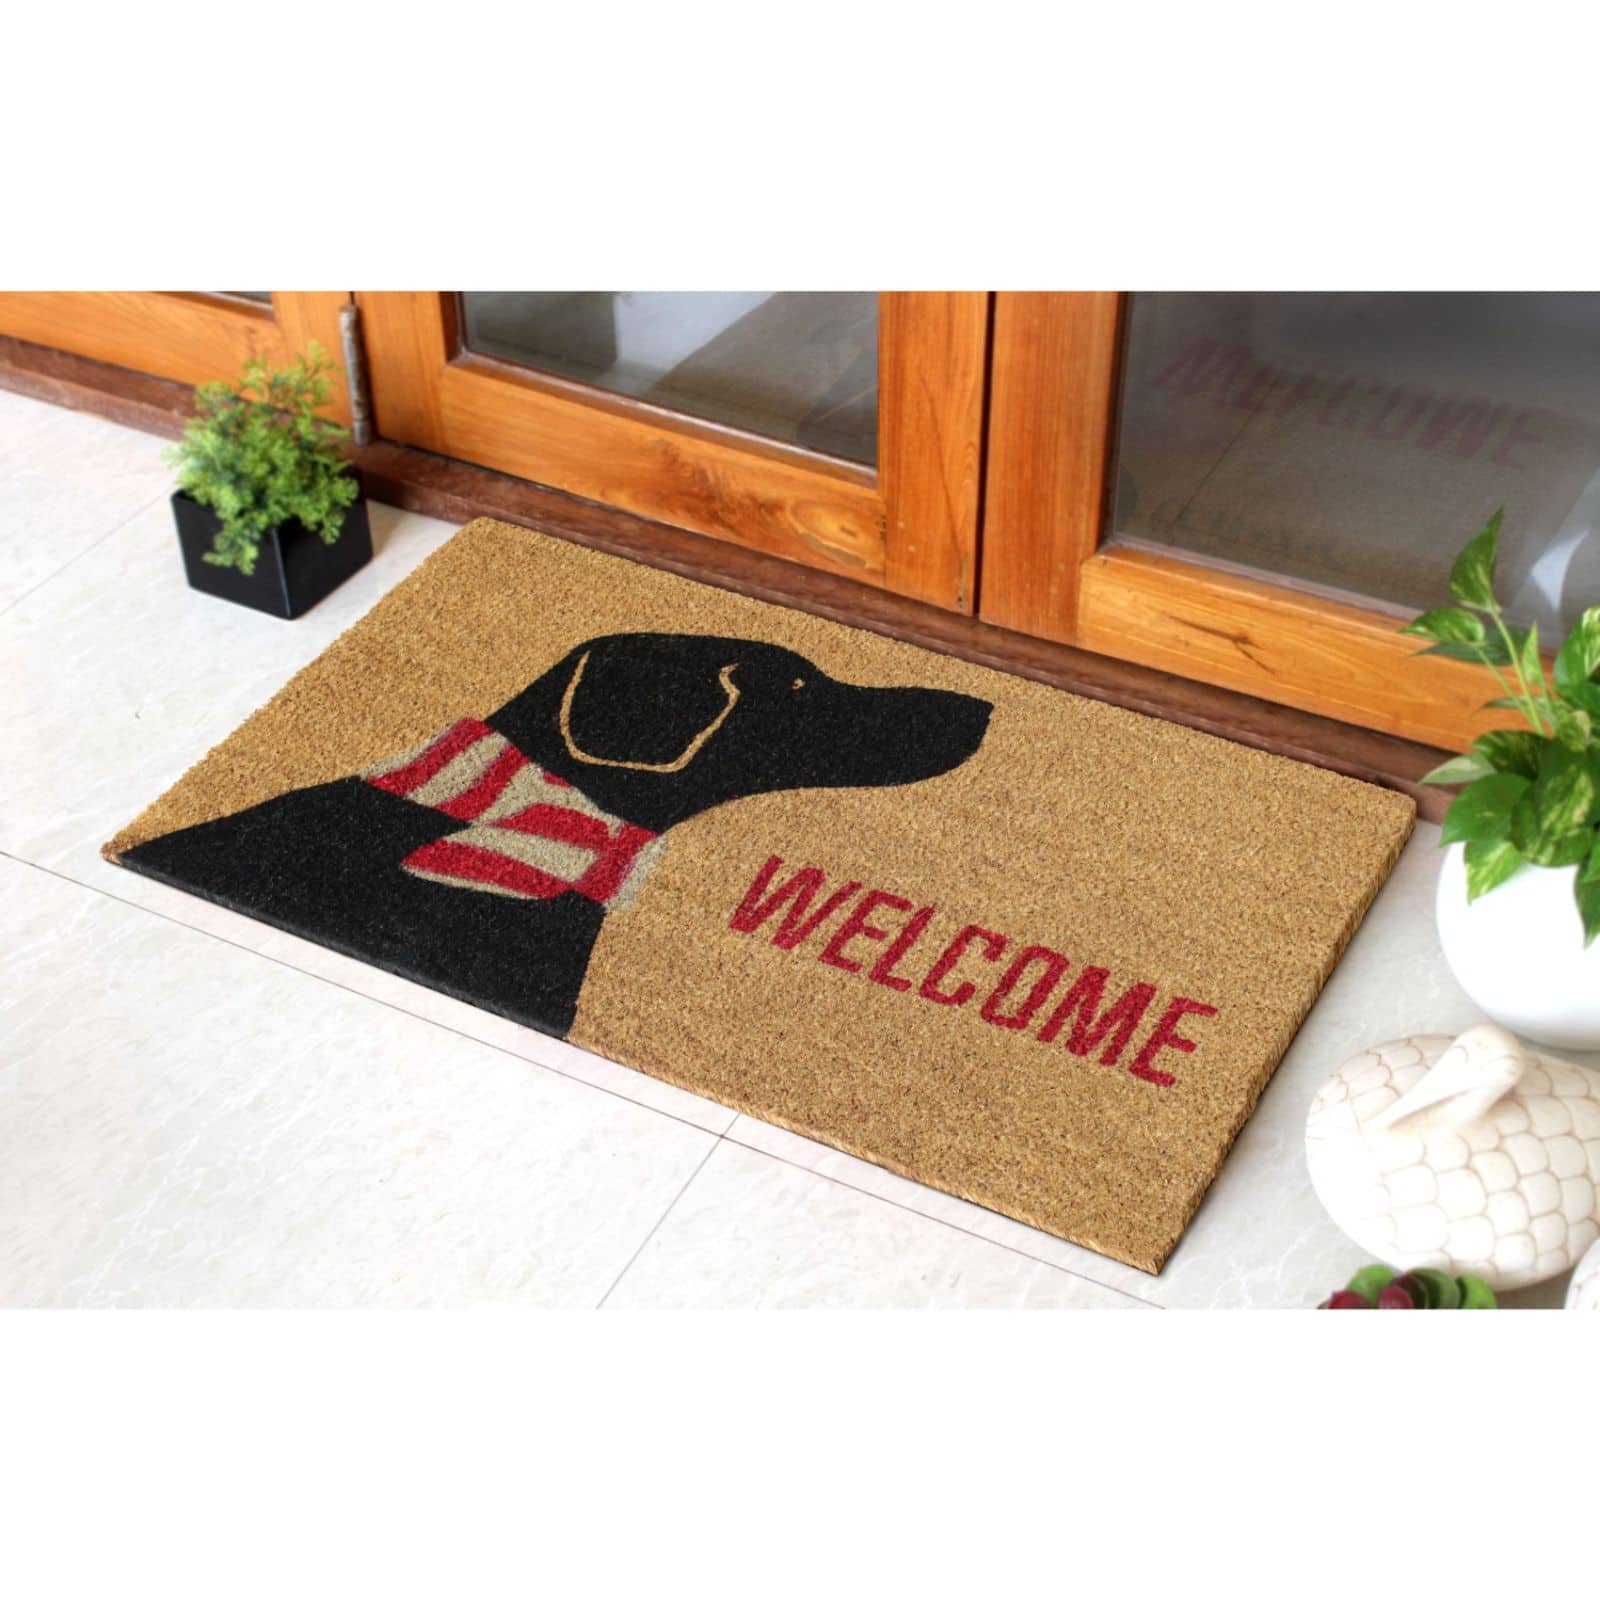 Rugsmith Natural Tufted Dog Welcome Doormat, 18 x 30